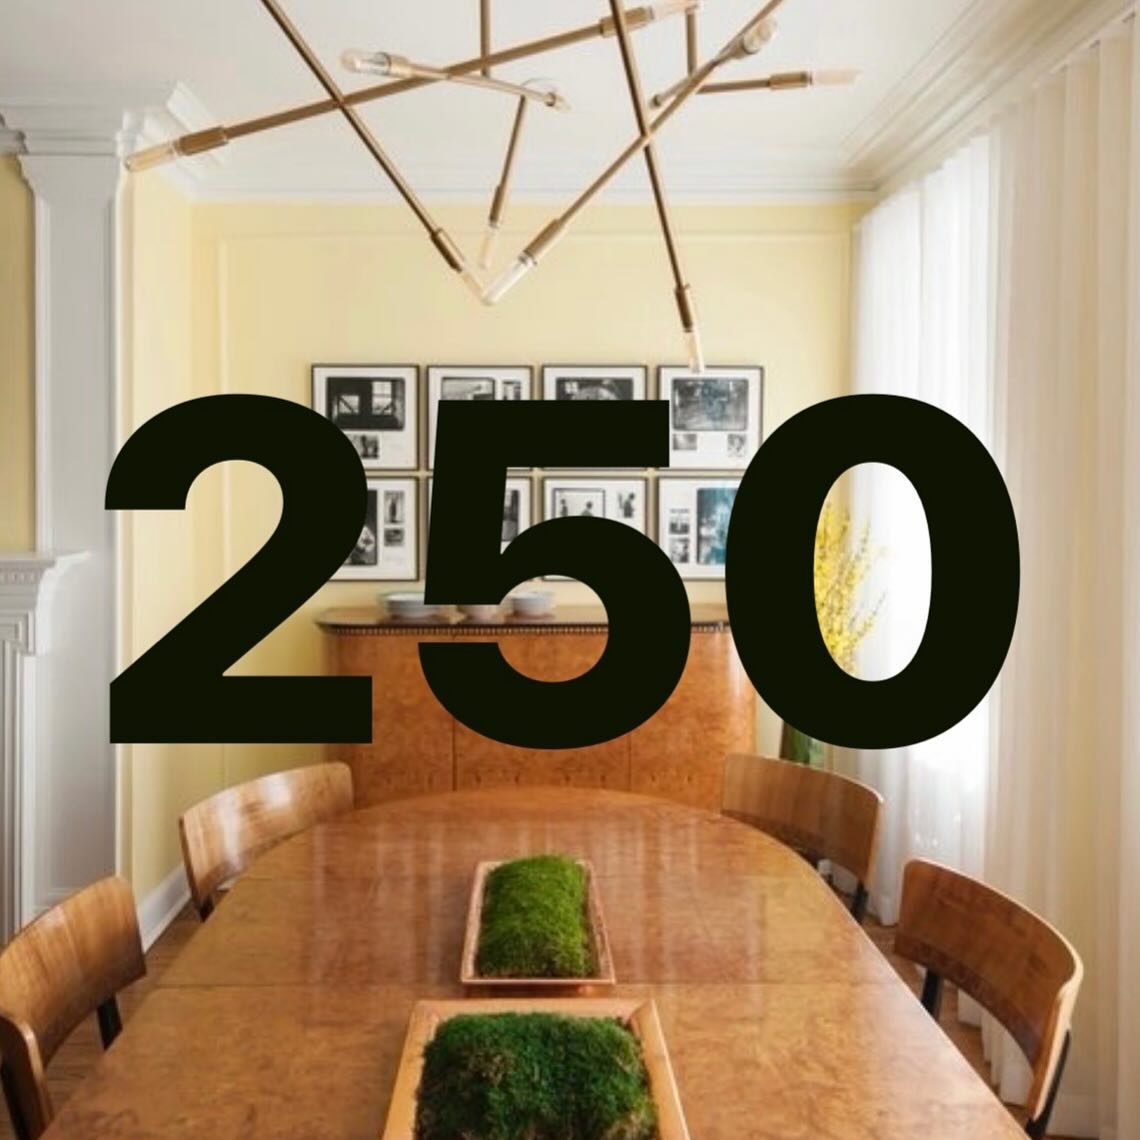 Thank you for being part of our first 250 followers! We&rsquo;re happy to have you along for the journey ✨ 

#searllamasterhowe #searllamasterhoweinteriors #theworldofinteriors #currentdesignsituation #fearlesshome #relaxedmodern #eclecticdecor #vogu